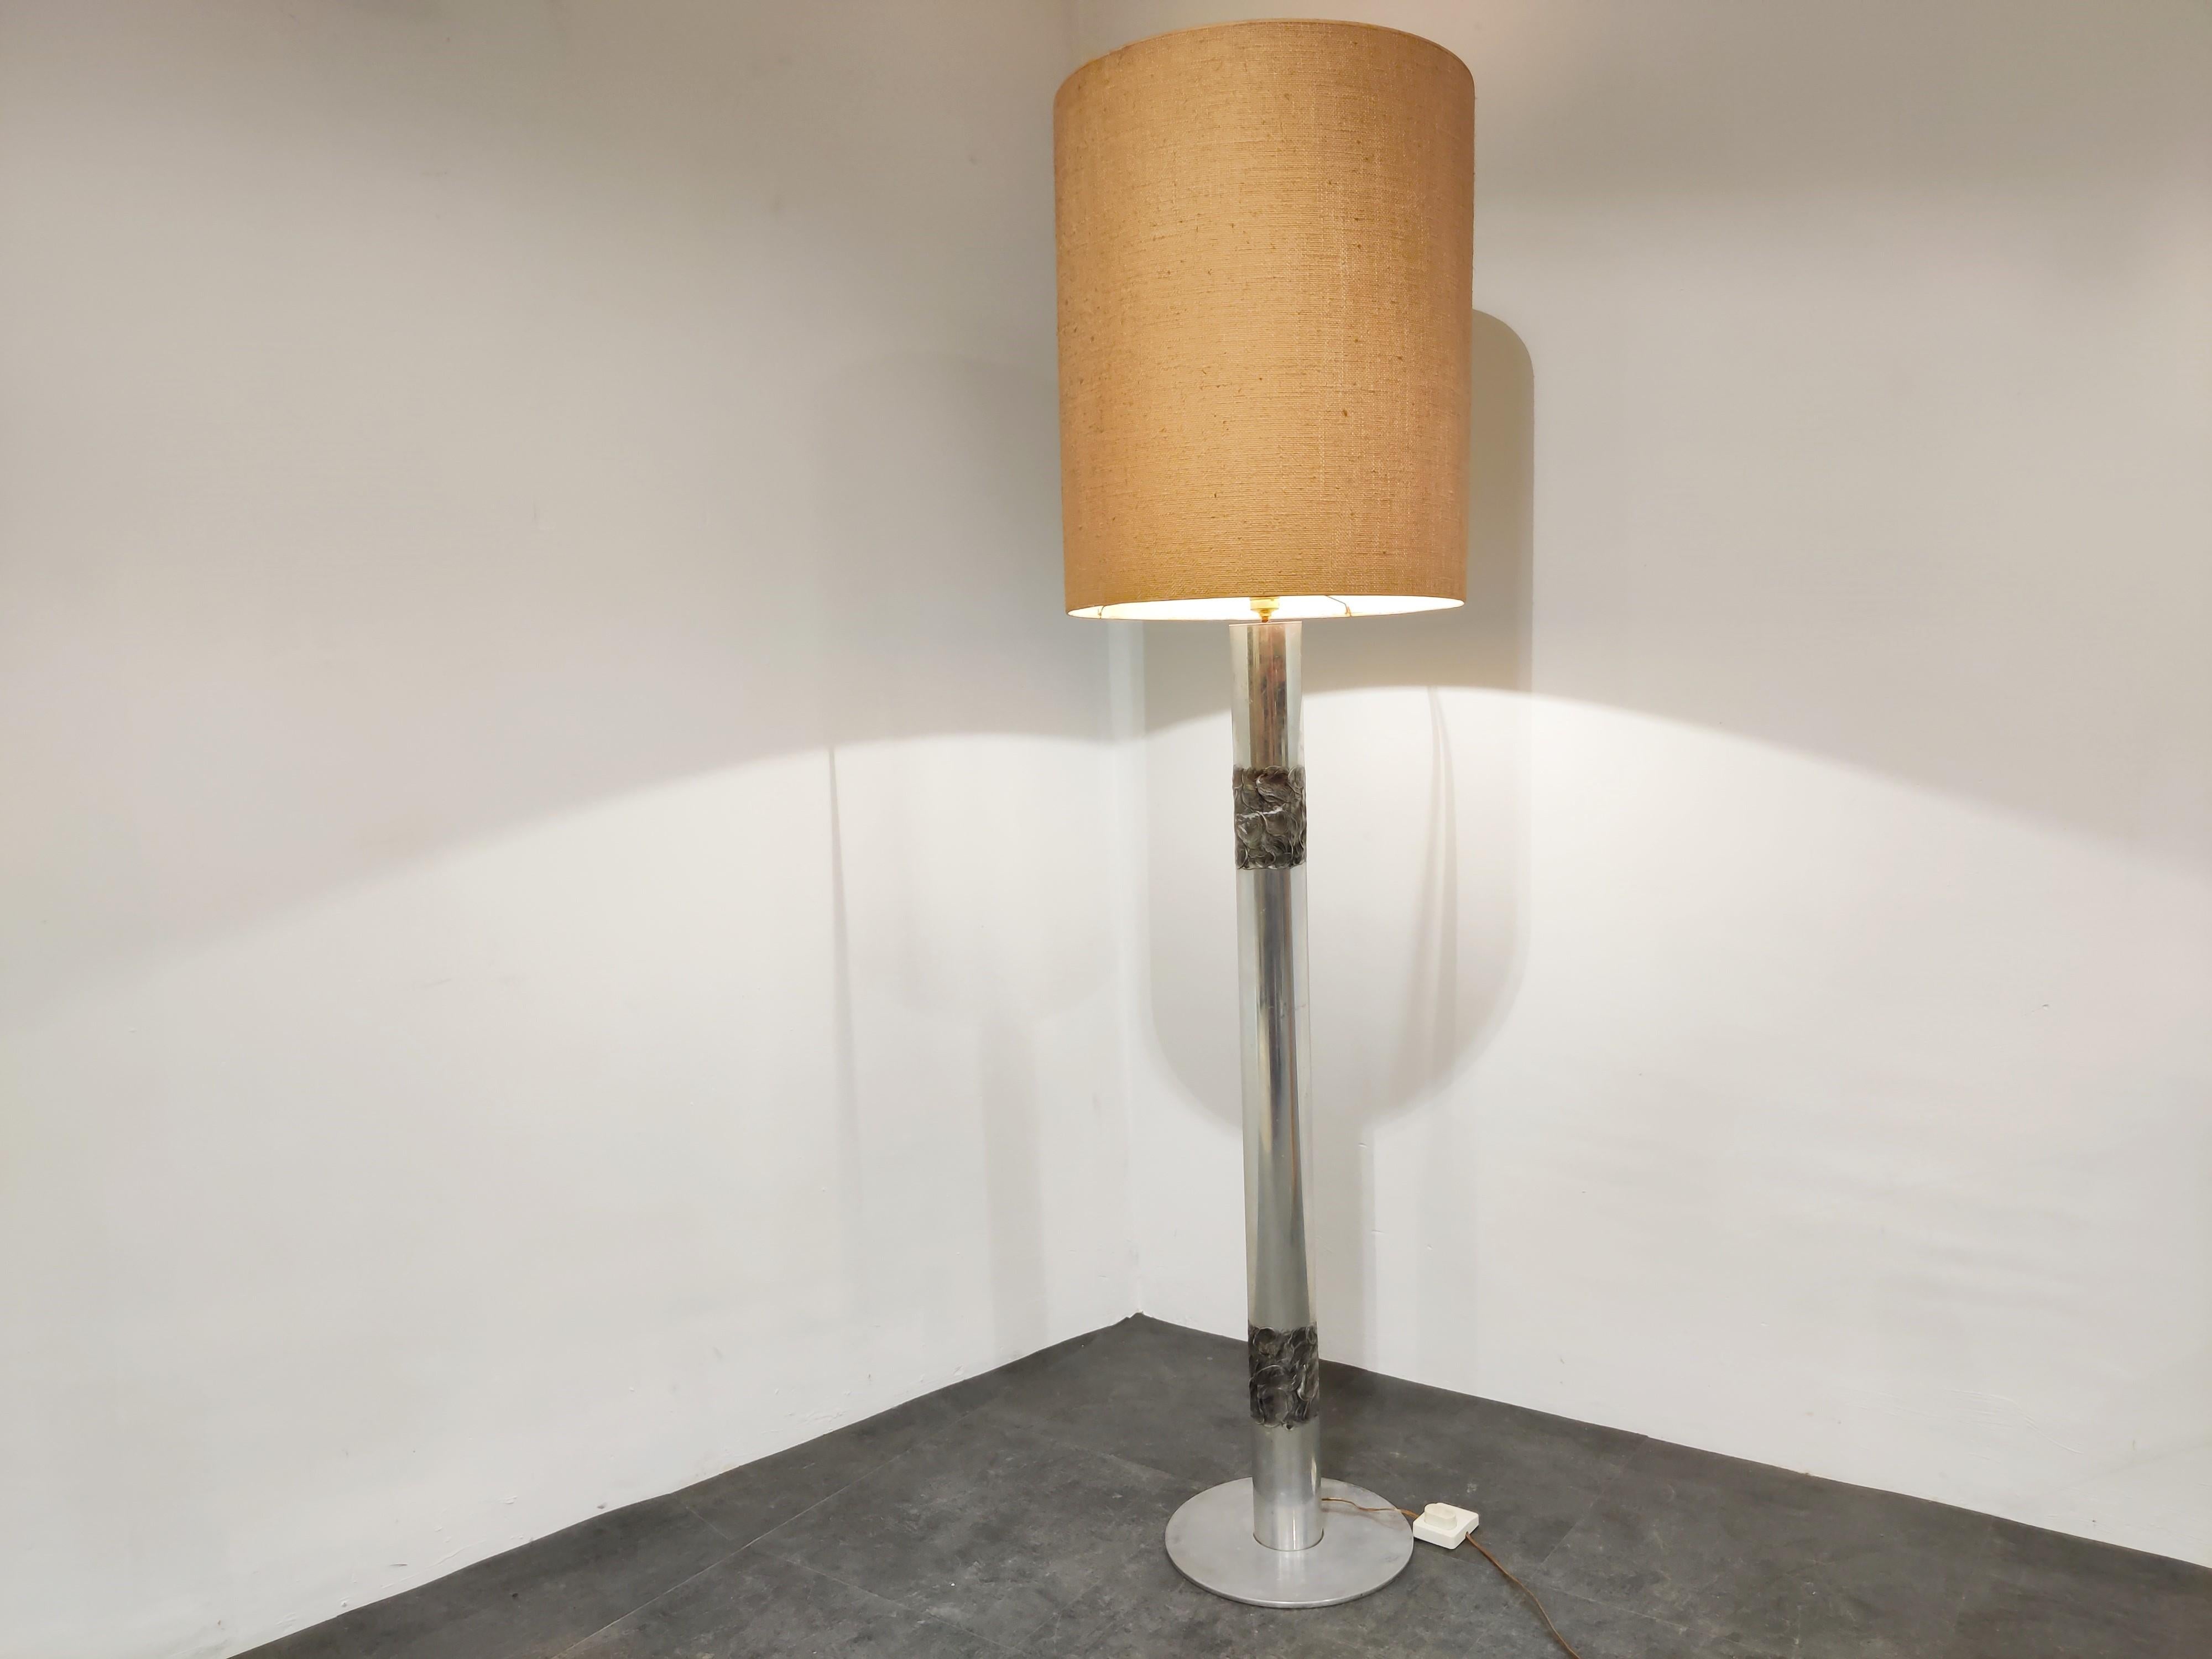 Very rare Brutalist floor lamp made from cast aluminum.

This lamp was made by Belgian goldsmith Willy Luyckx for a Belgian company called Aluclair.

Willy Luyckx was a goldsmith who worked for goldsmith Camille Colruyt before starting his own